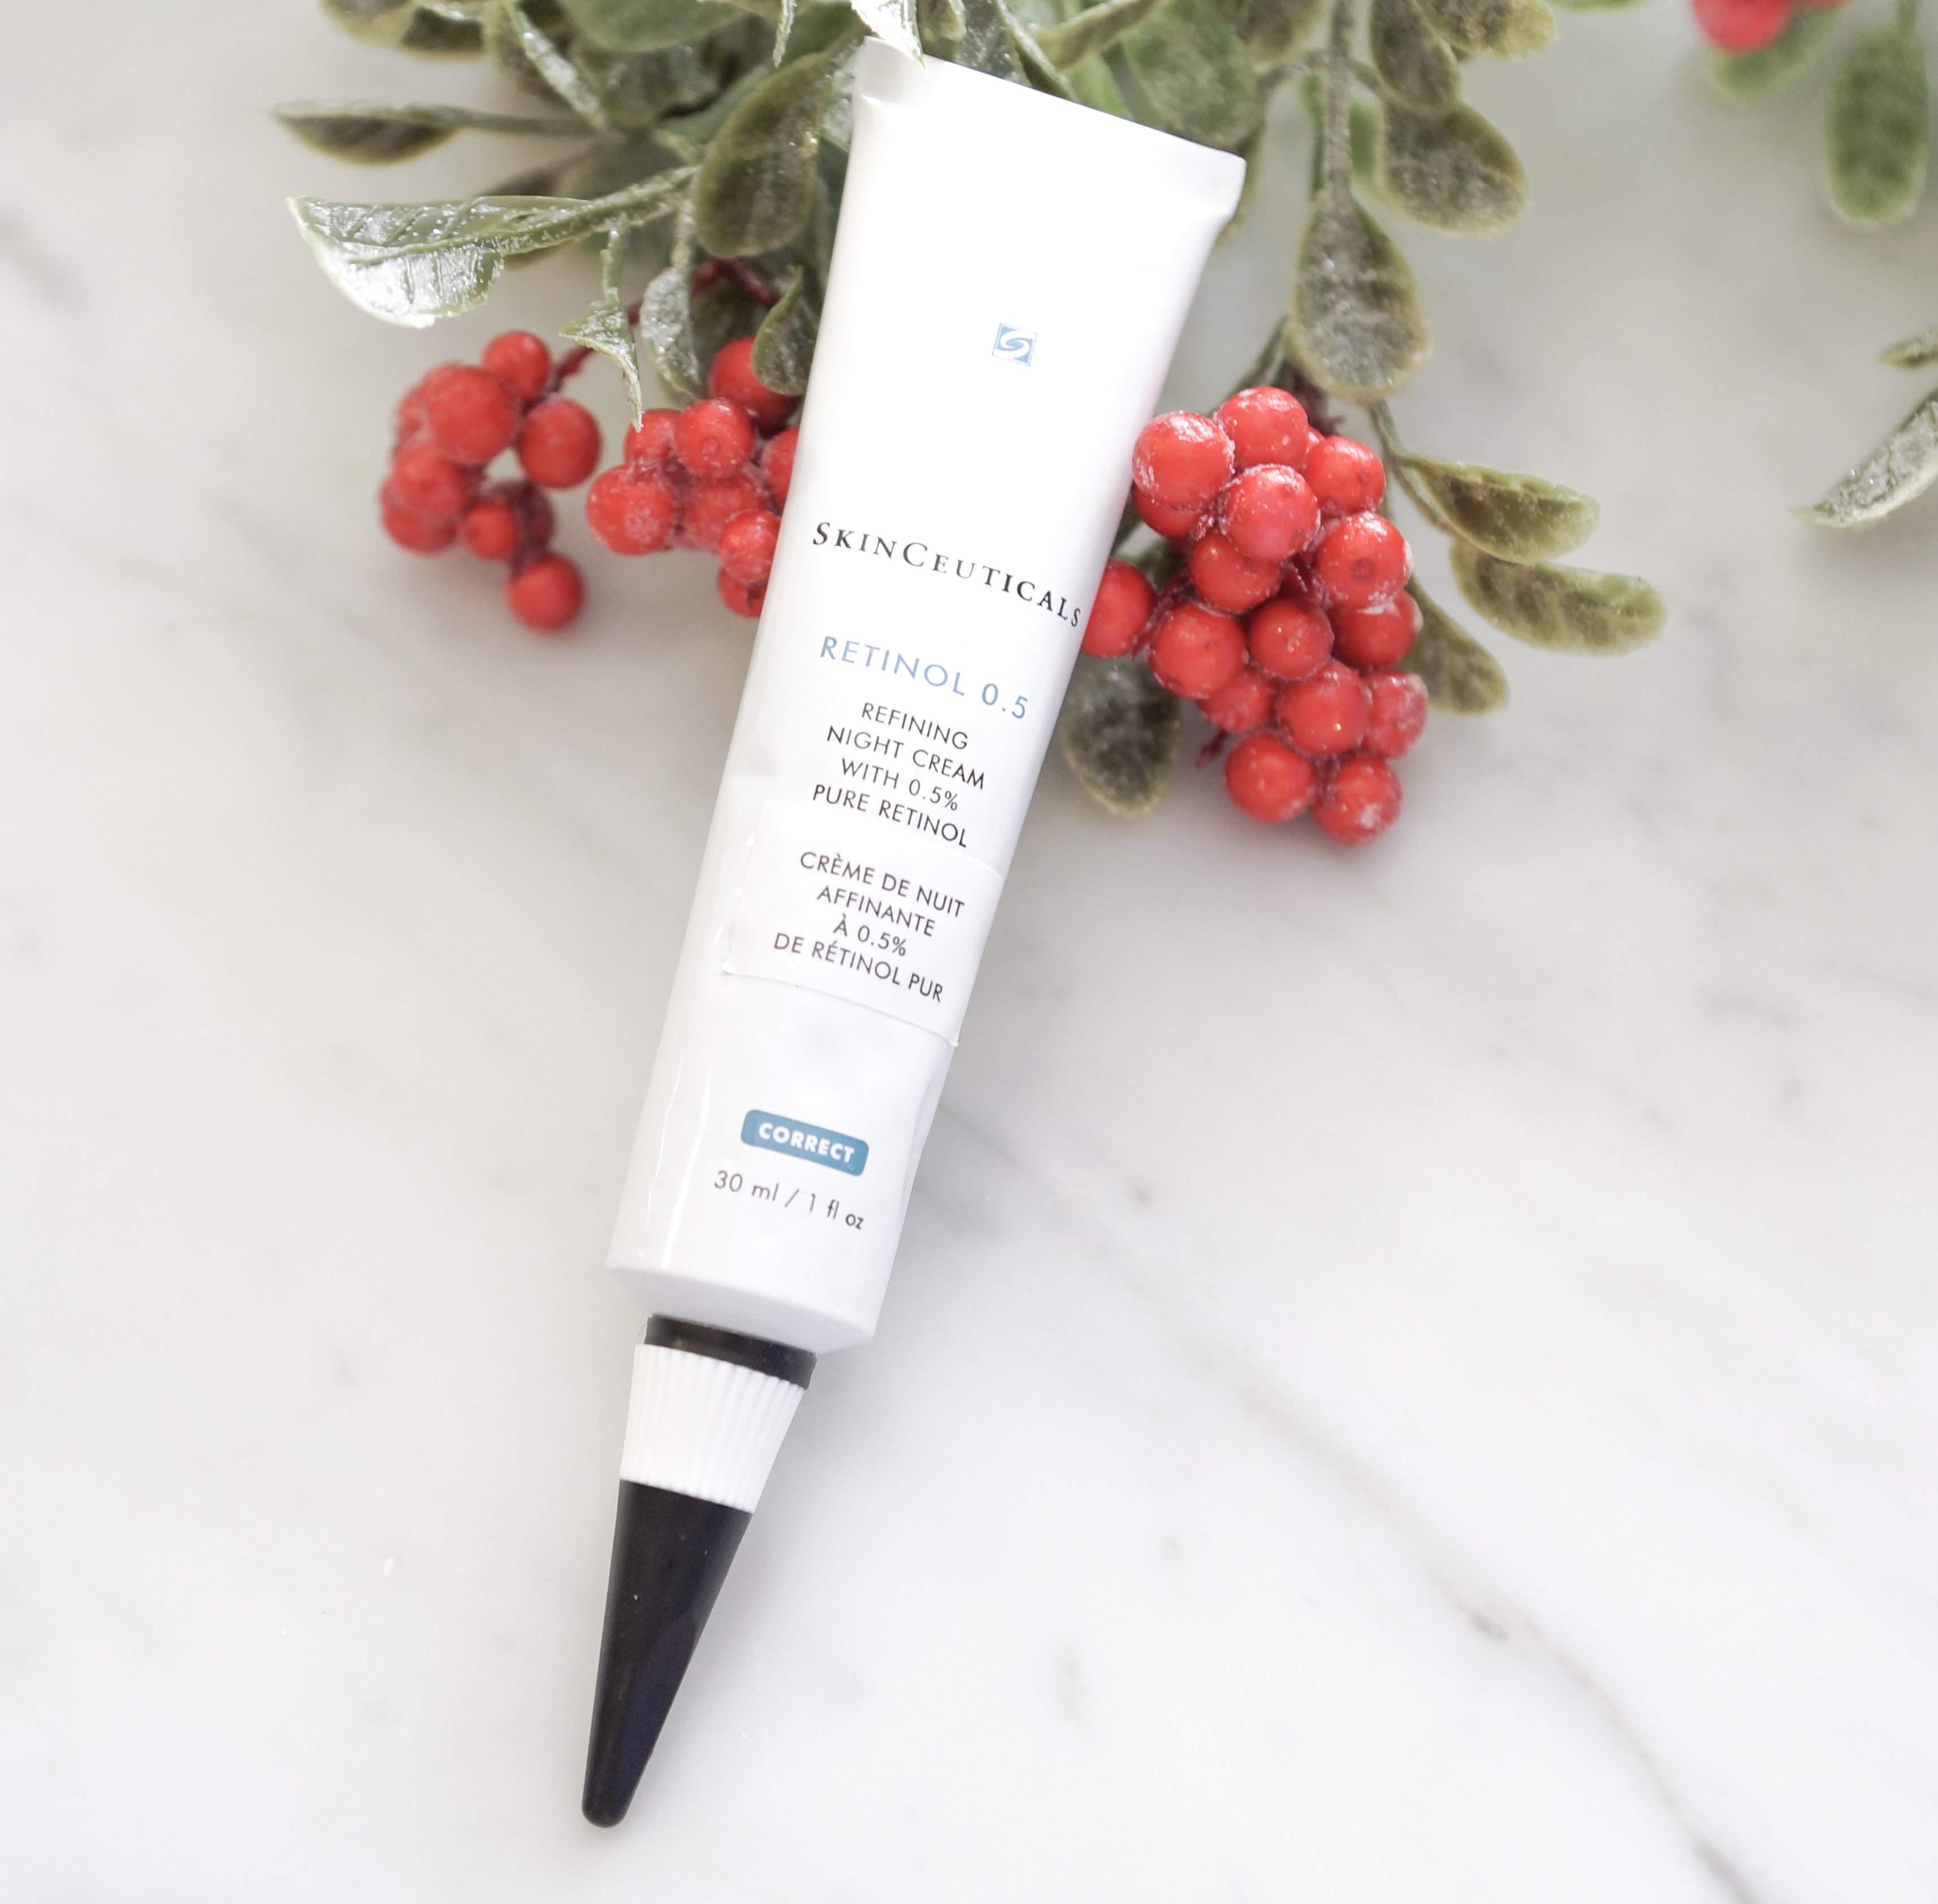 årsag historie Agurk SkinCeuticals Canada on Twitter: "#SkinCeuticals Retinol 0.5 contains 0.5%  pure retinol to help stimulate cell regeneration and diminish the  appearance of fine lines, wrinkles and signs of aging. Learn more about  Retinol